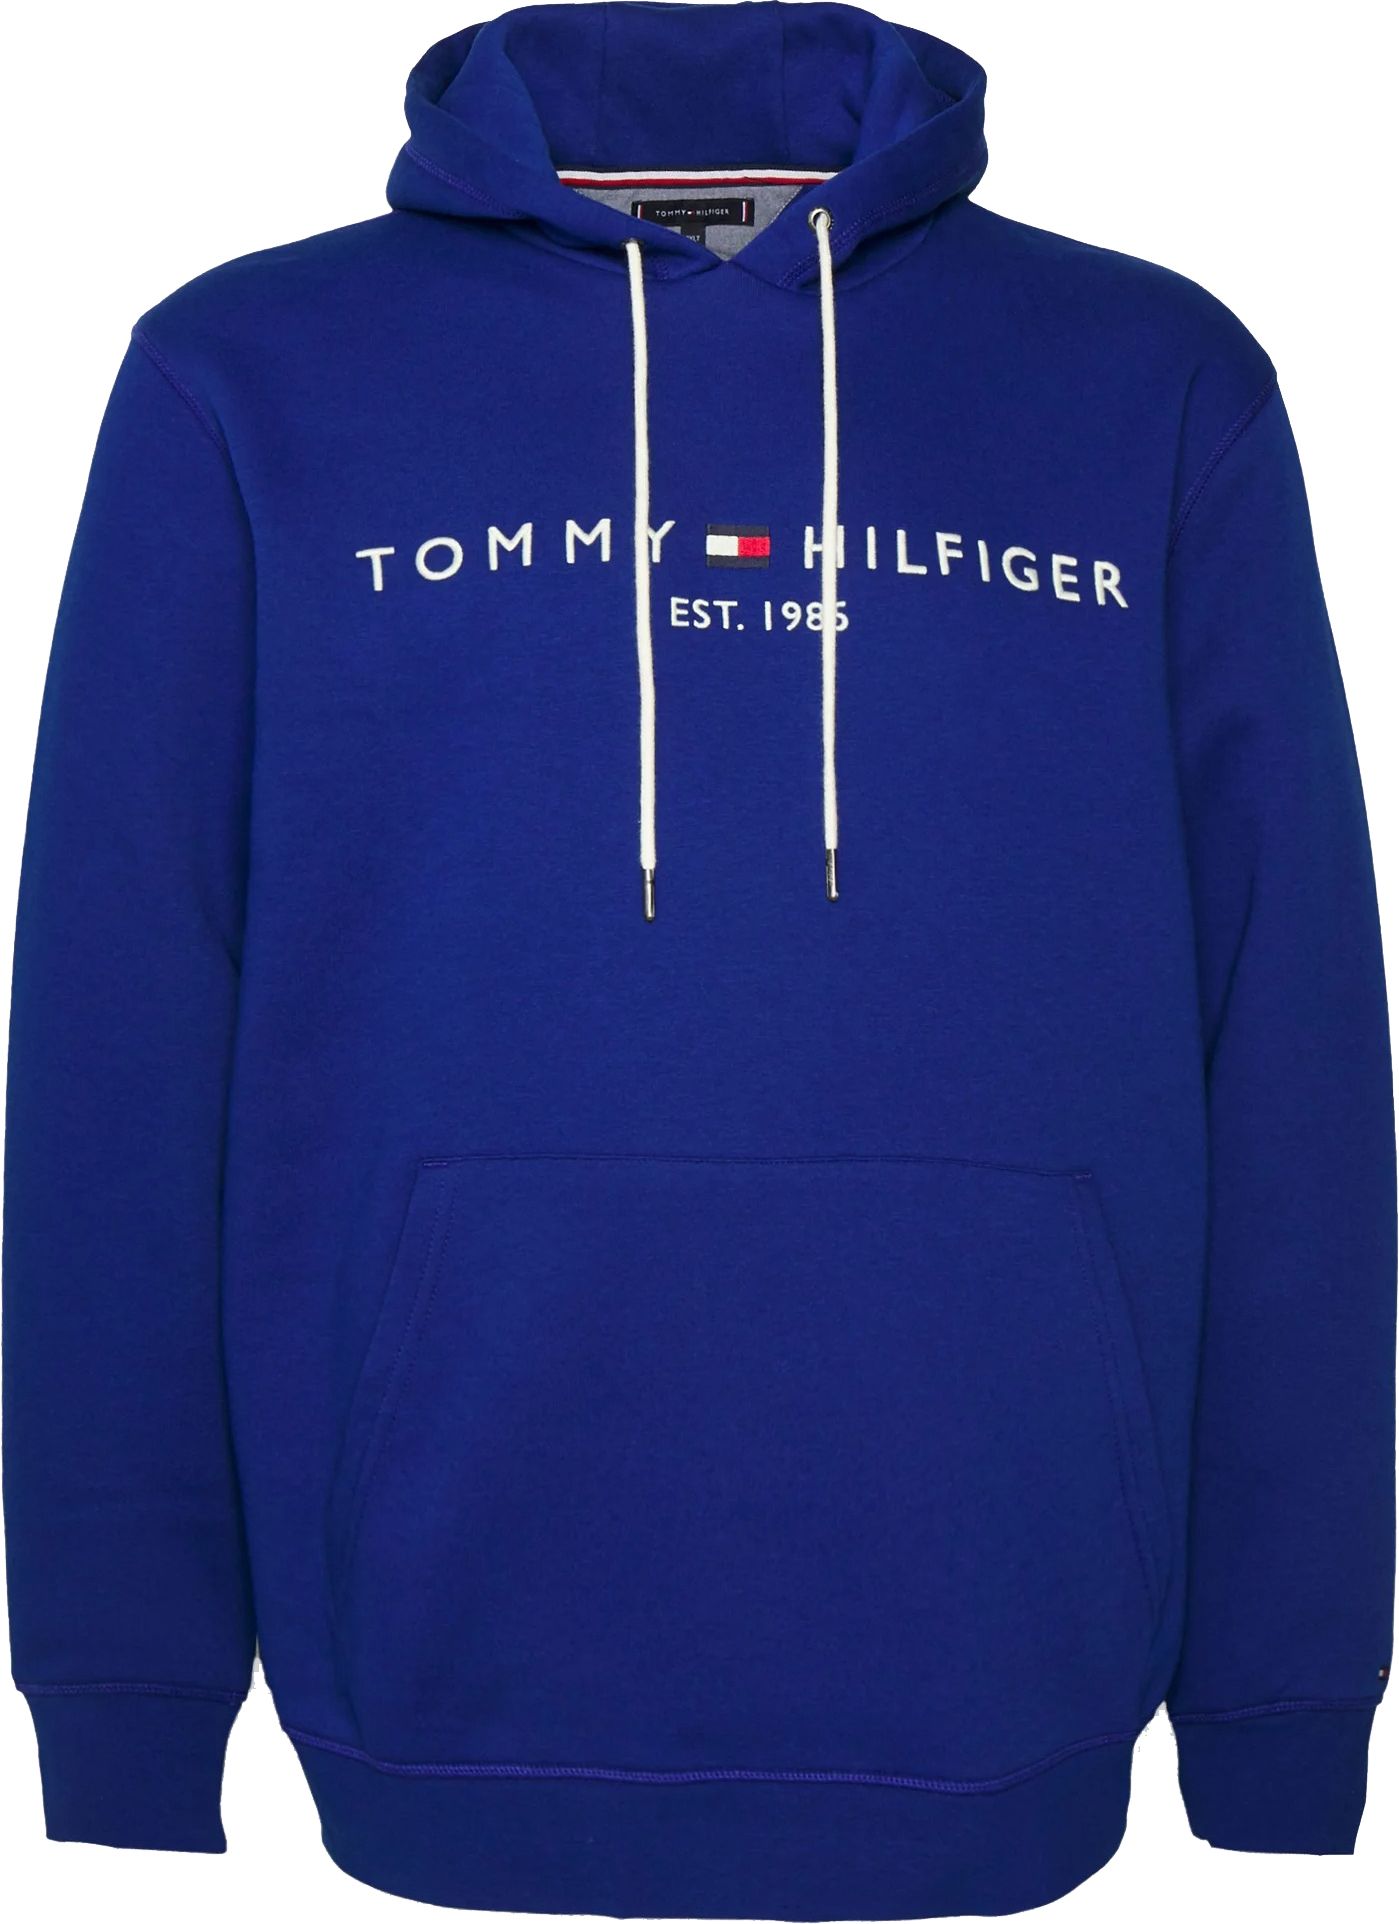 Tommy Hilfiger Big and Tall Hoodie Blue size 3XL